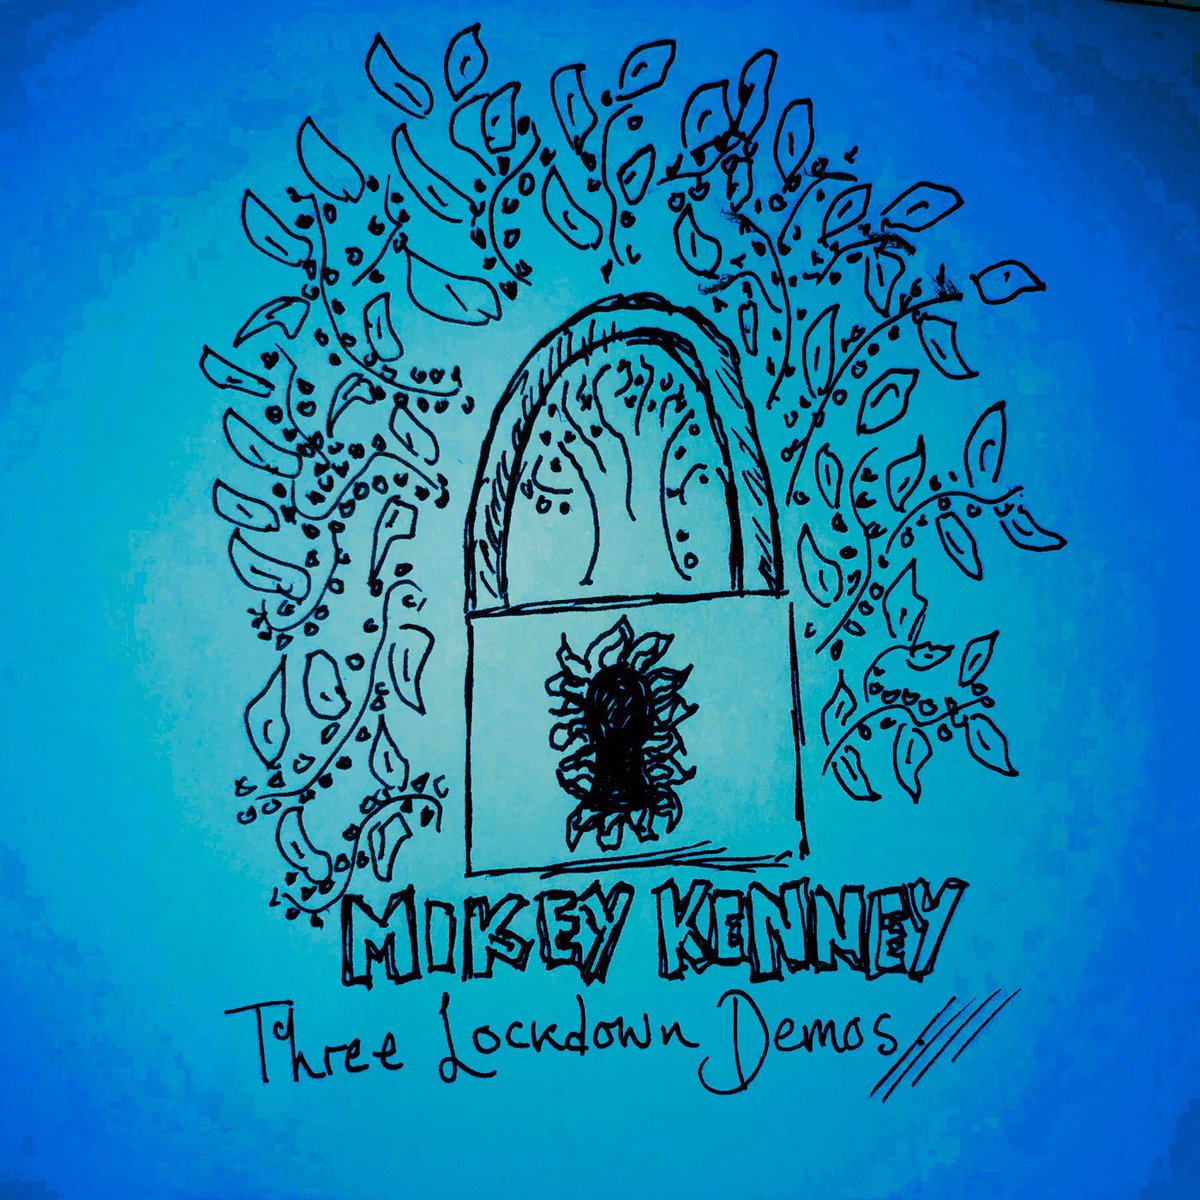 I recently stumbled upon three demos that I made as part of my practice during the Covid pandemic lockdown in England in 2020-2021. These aren't the greatest quality- never intended for release but they document an interesting time in my musical life. mikeykenney.bandcamp.com/album/three-lo…